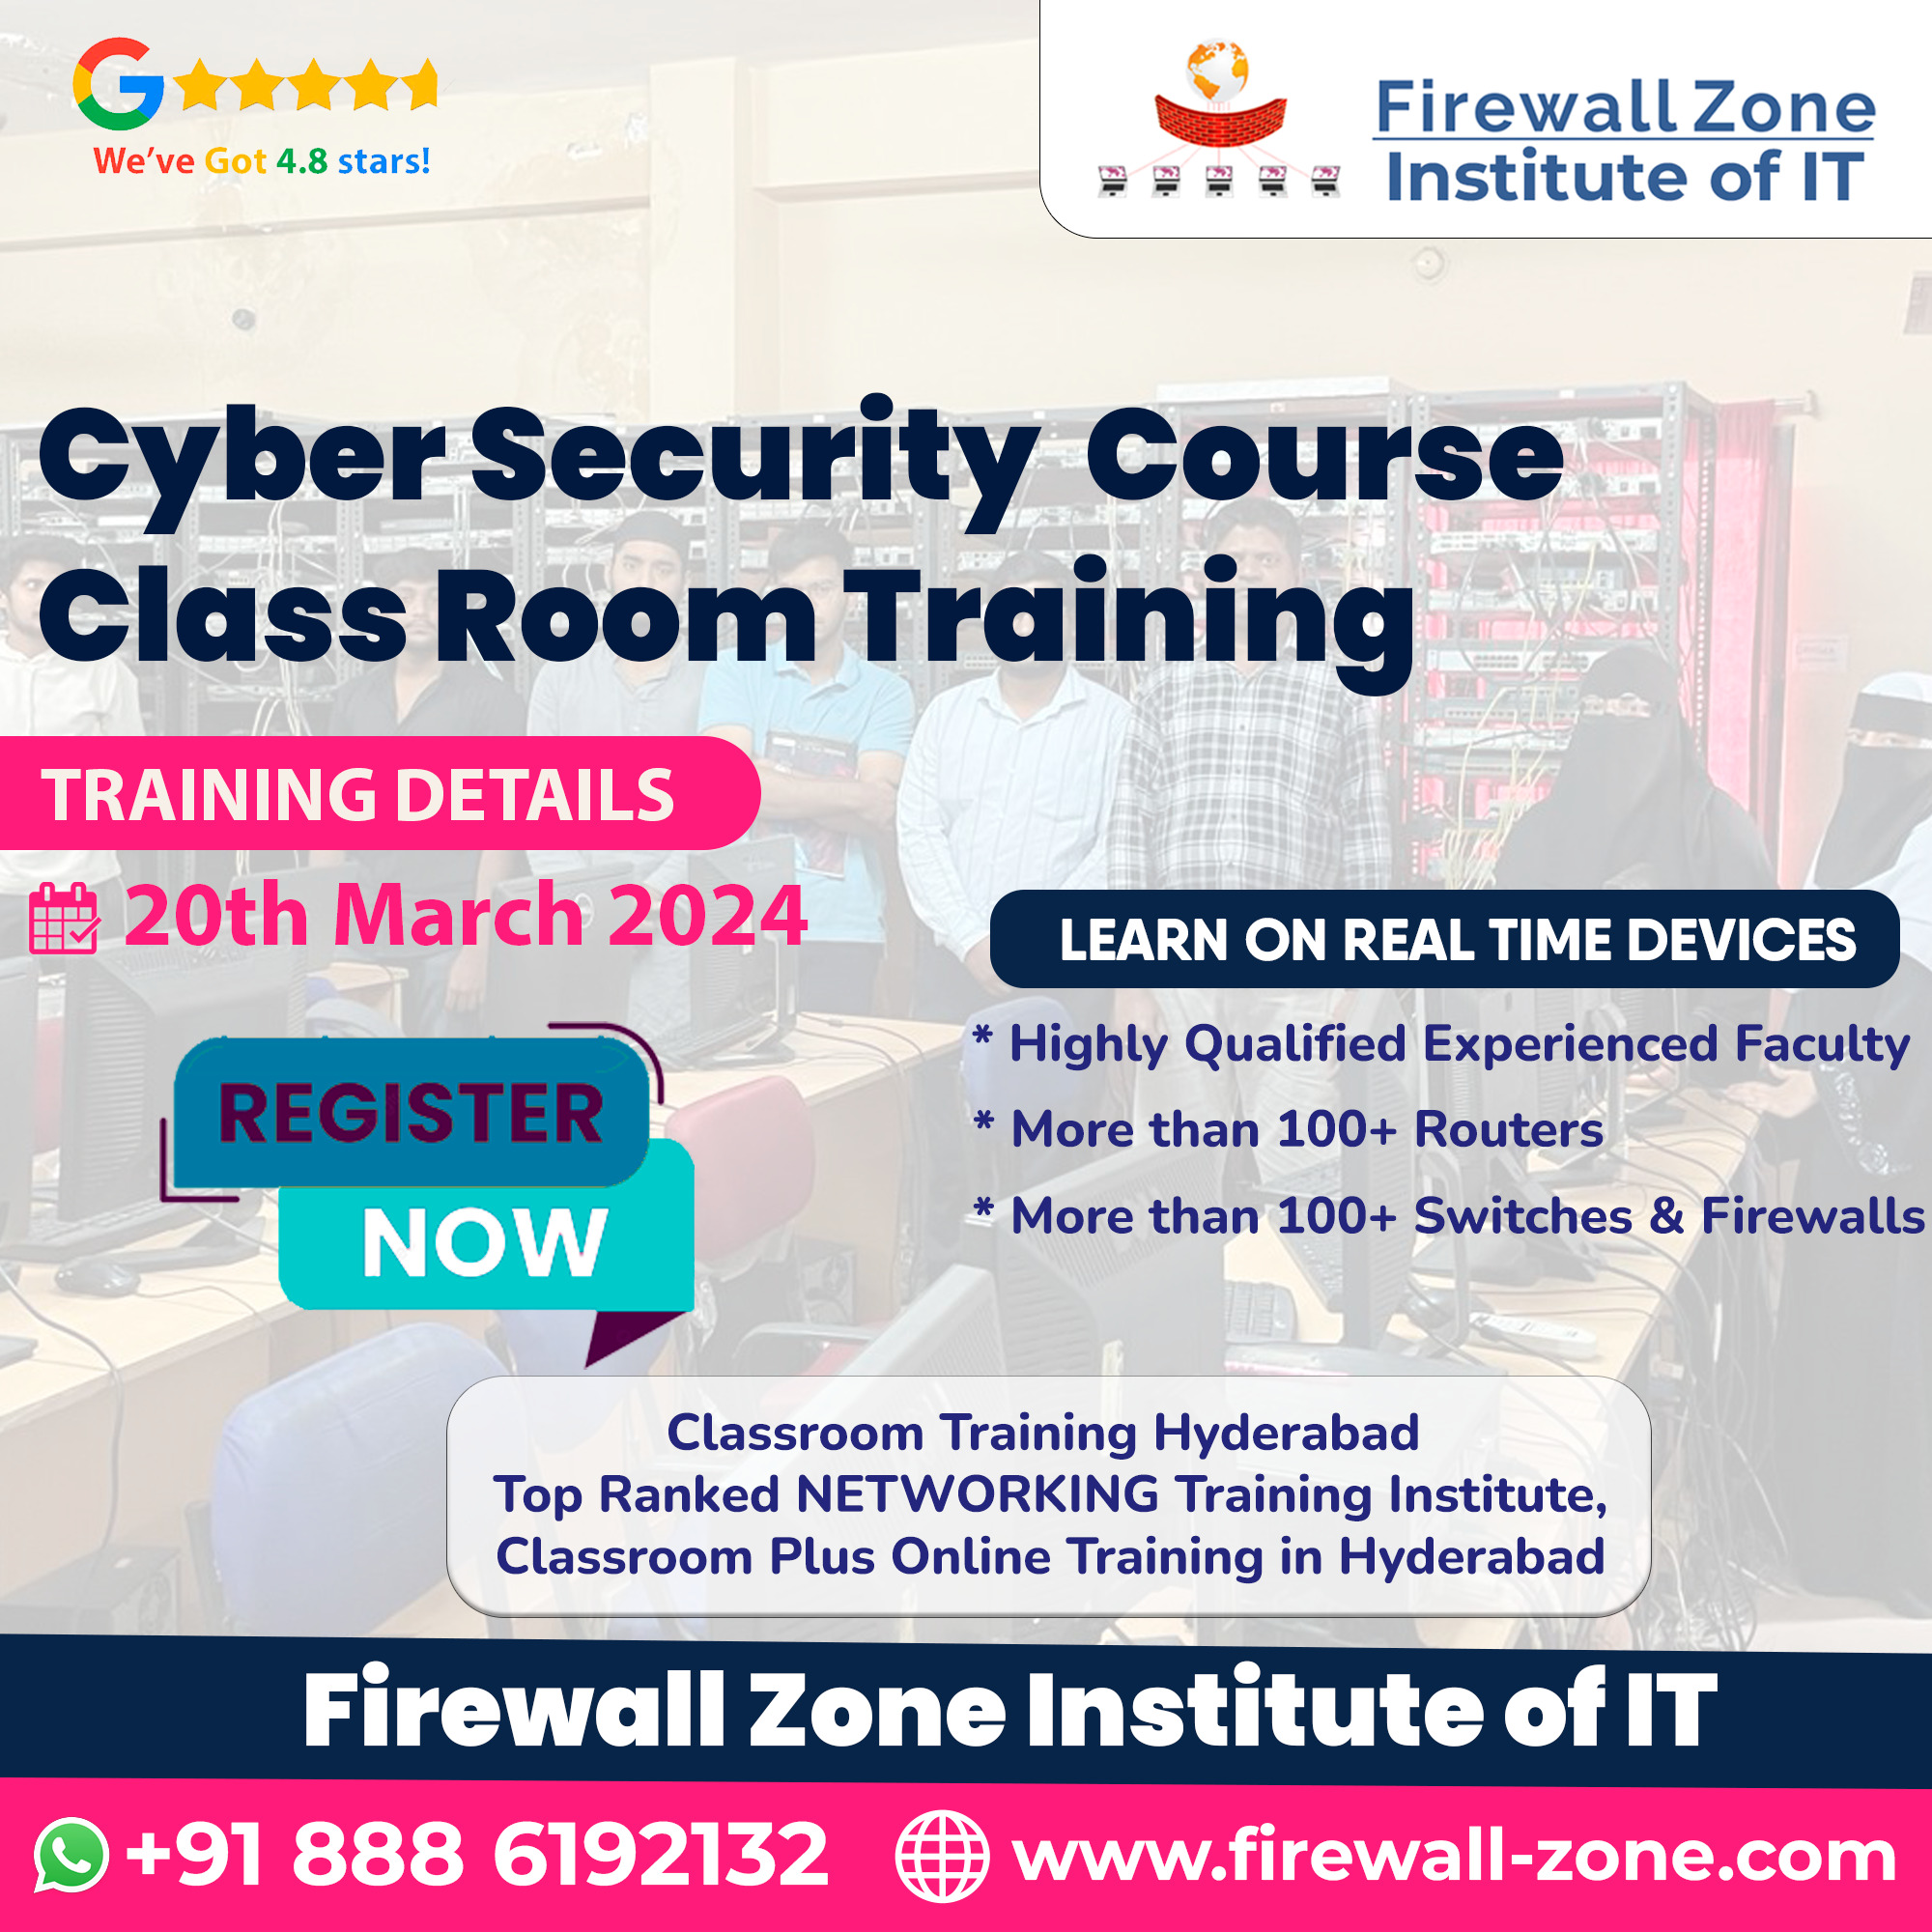 Our Cyber Security Training In Hyderabad at Firewall-zone Institute of IT, Hyderabad, Telangana, India